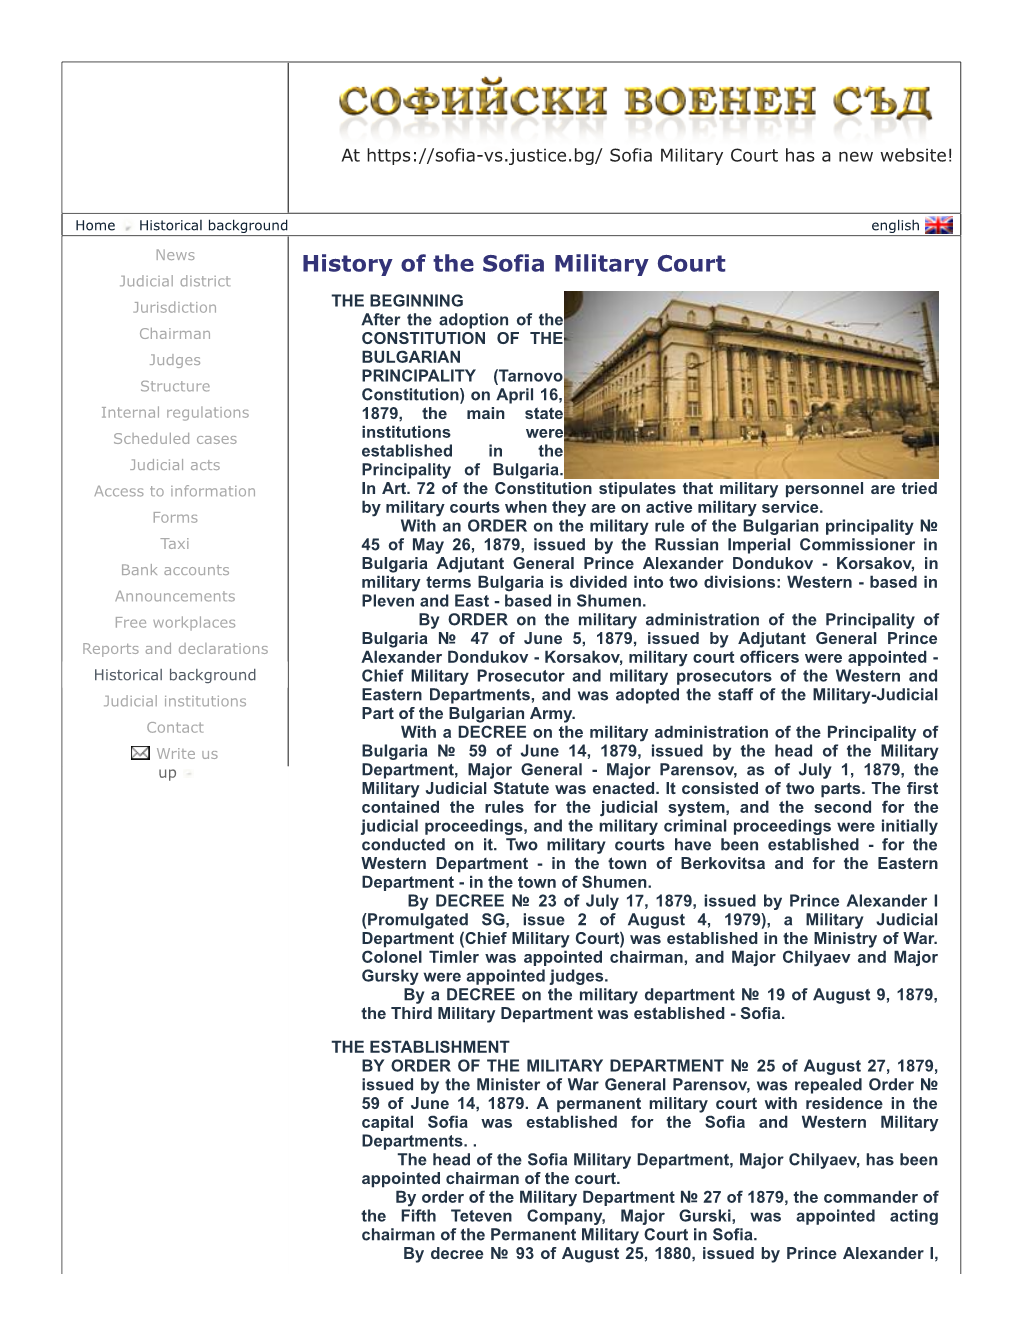 History of the Sofia Military Court